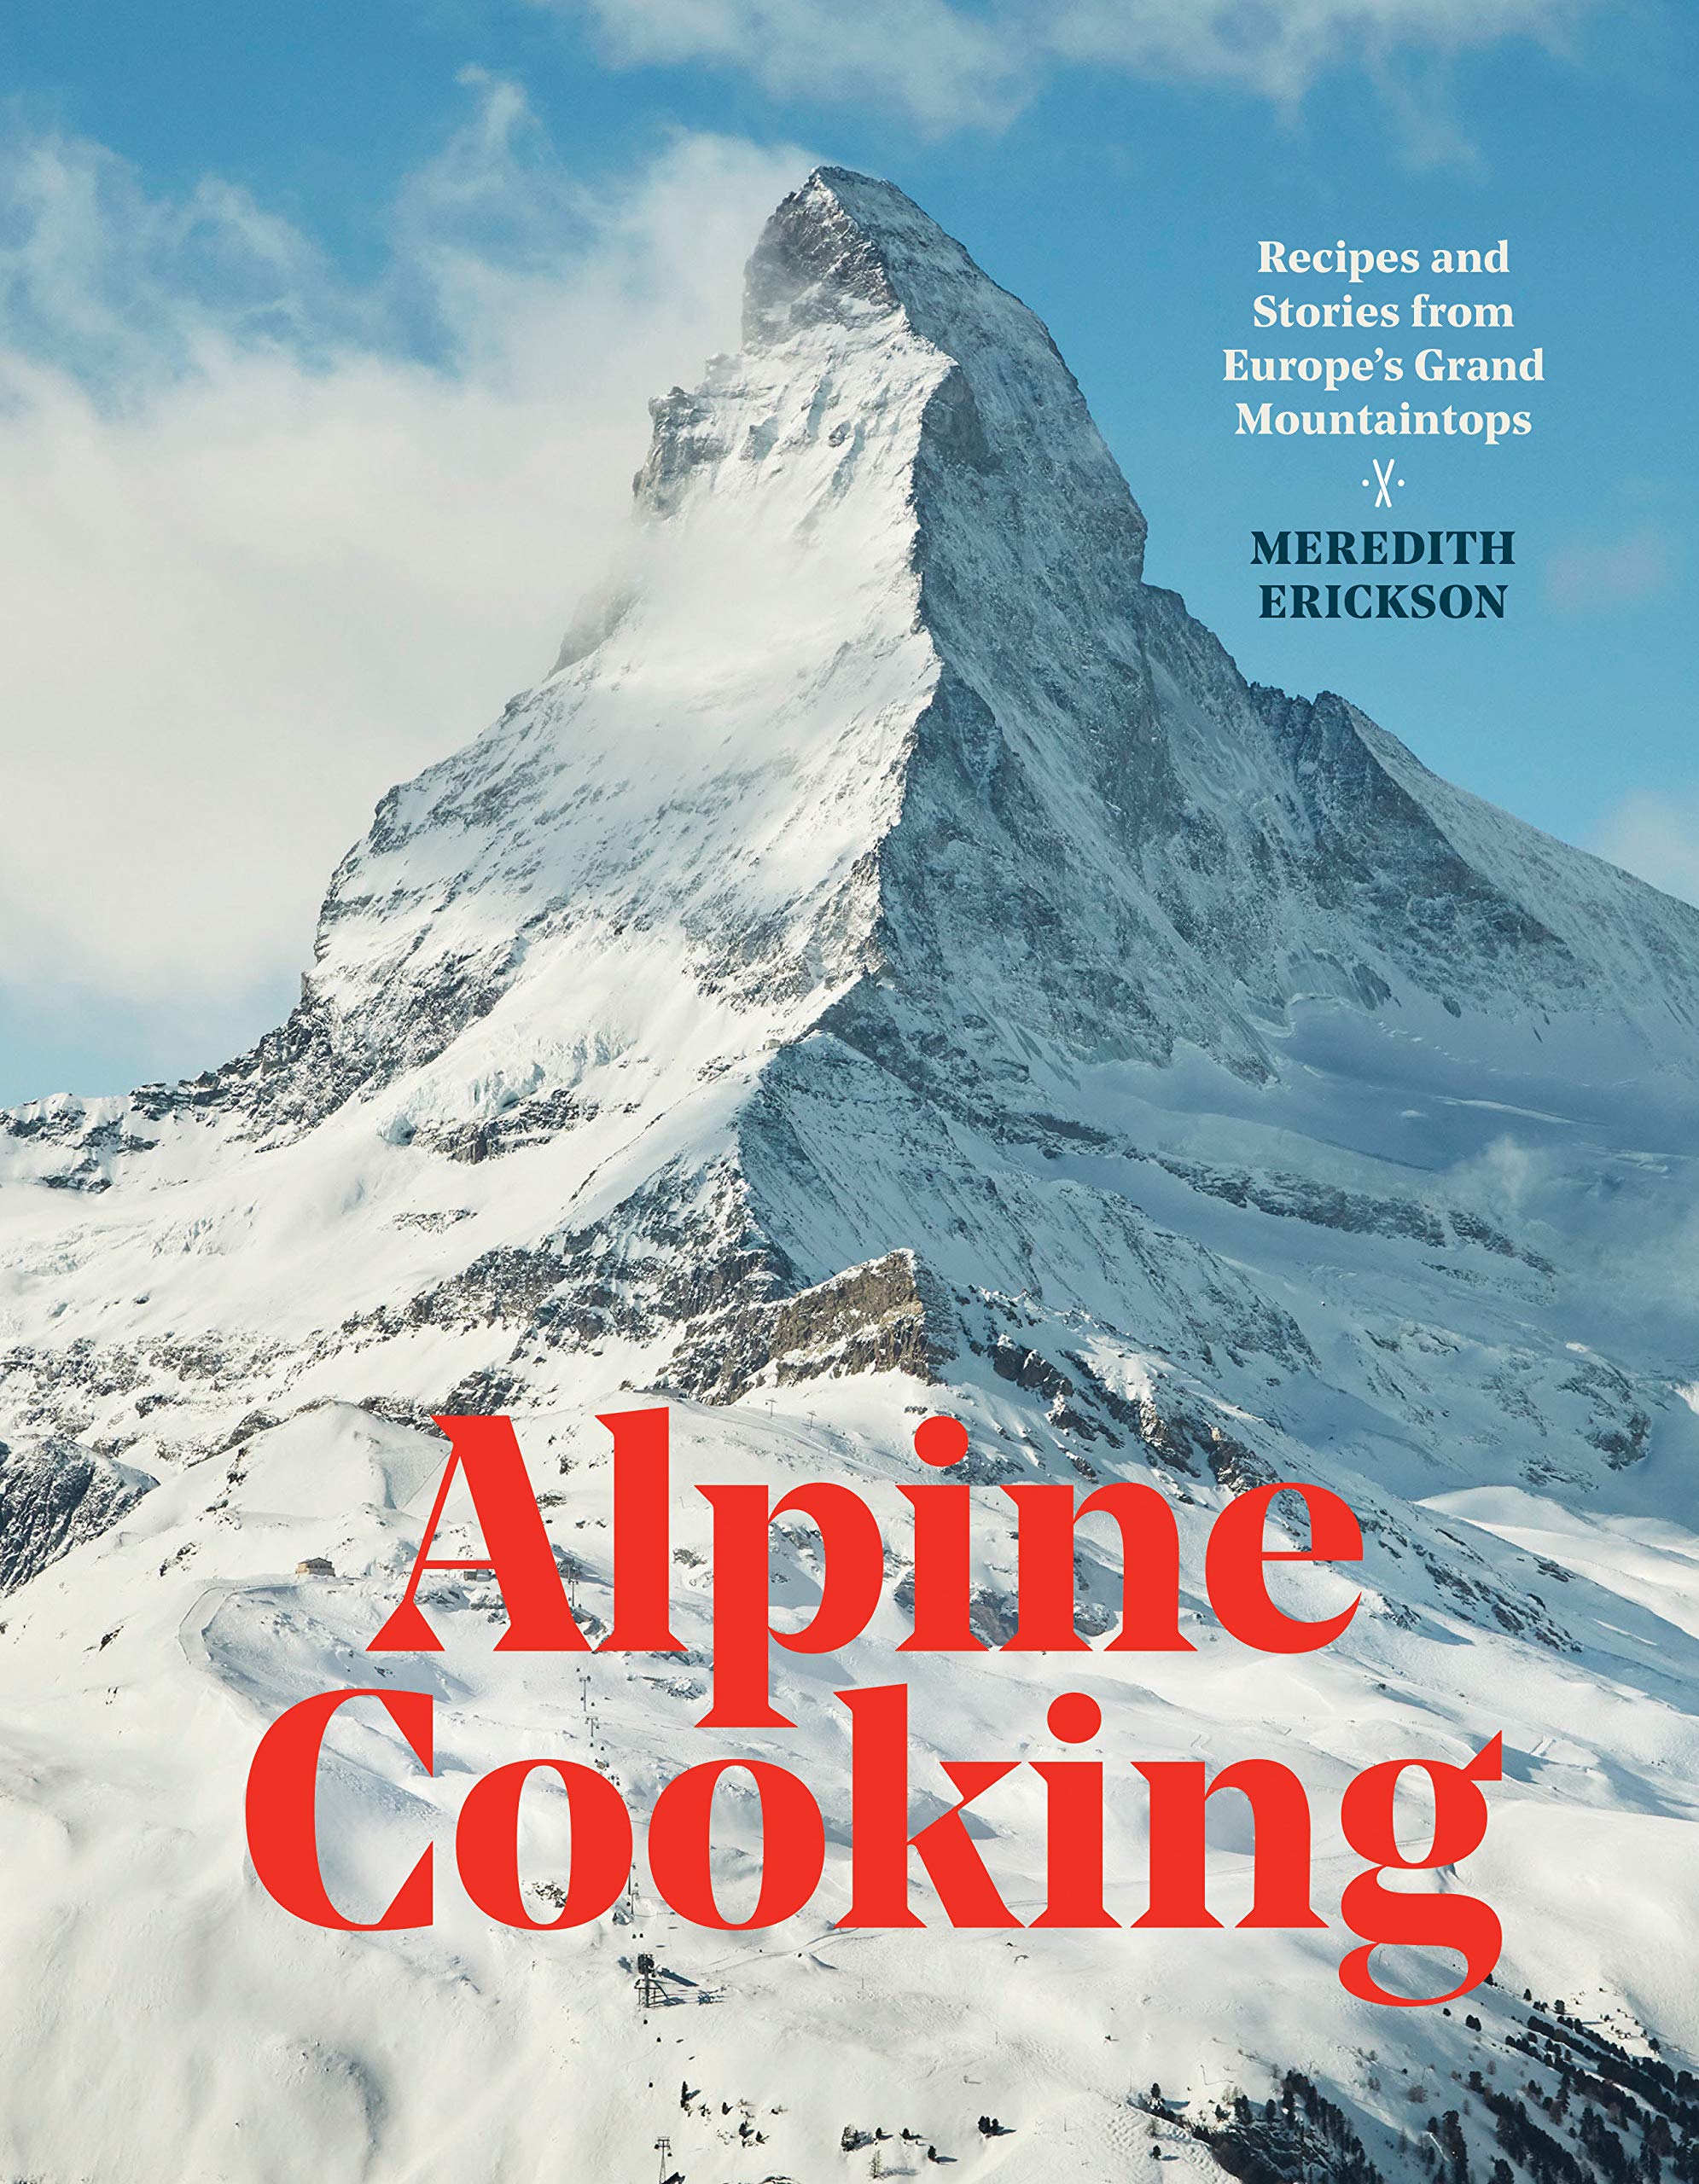 Alpine Cooking: Recipes and Stories from Europe's Grand Mountaintops (Meredith Erickson)